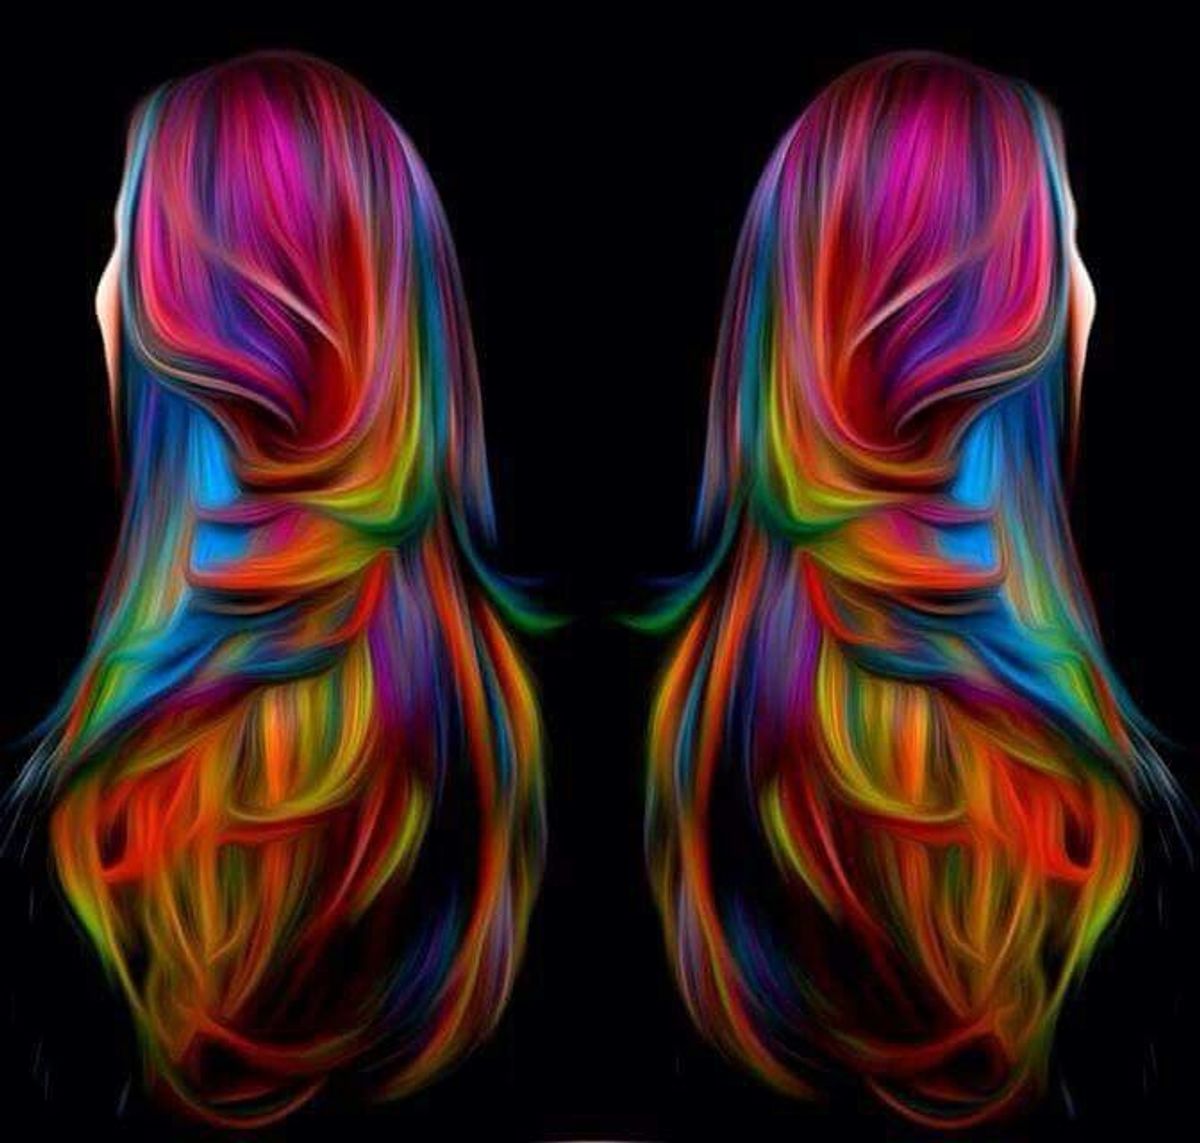 The Emotions of Dying Your Hair a "Rainbow" Color